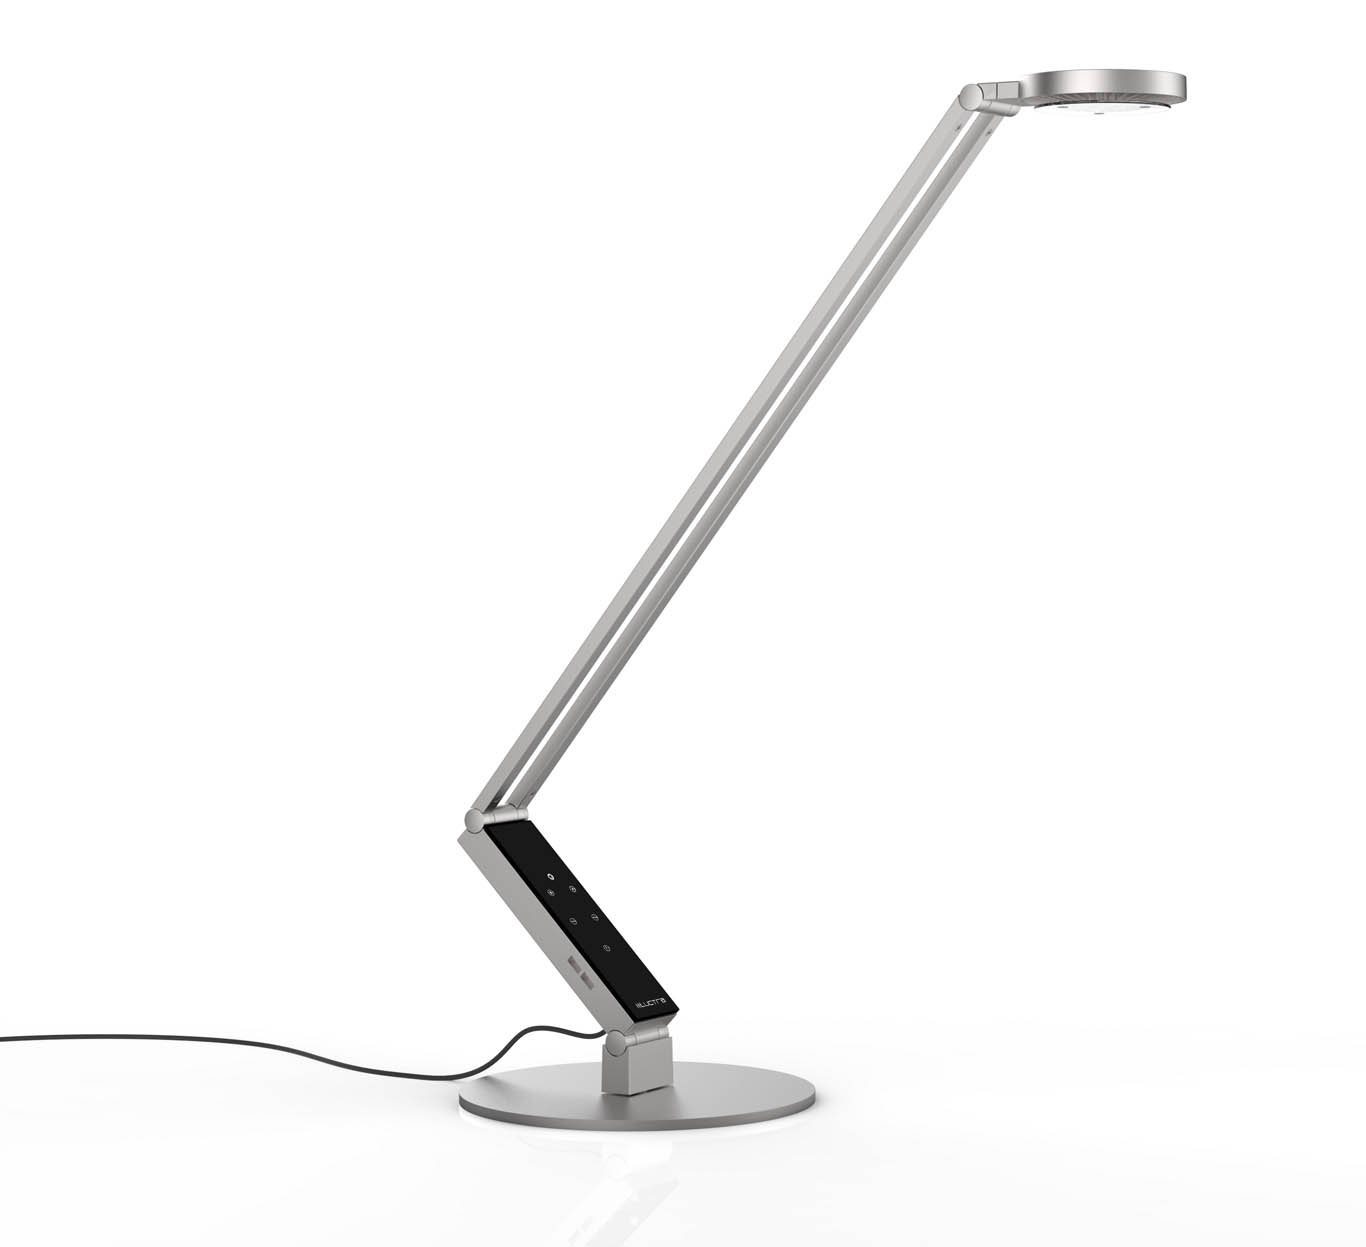 LUCTRA Tischleuchte TABLE PRO 2 RADIAL BASE, Luctra Table Pro 2 Linear Base LED Schreibtischlampe, biologisch wirks von LUCTRA